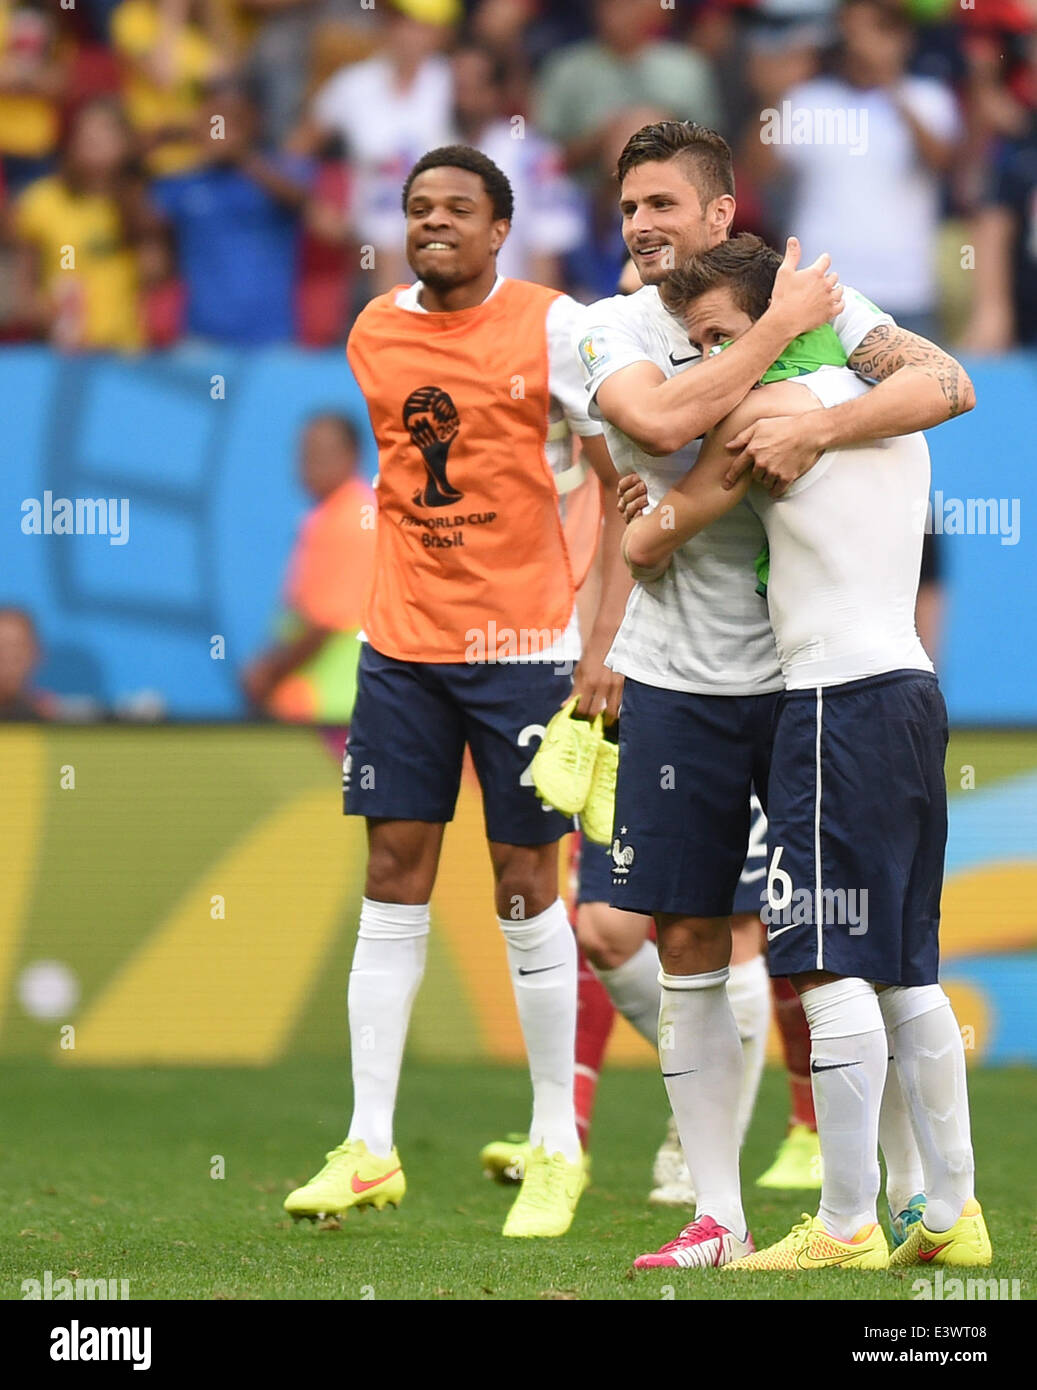 Brasilia, Brazil. 30th June, 2014. Yohan Cabaye (R) and Olivier Giroud (C) of France celebrate after the FIFA World Cup 2014 round of 16 match between France and Nigeria at the Estadio National Stadium in Brasilia, Brazil, on 30 June 2014. Credit:  dpa picture alliance/Alamy Live News Stock Photo